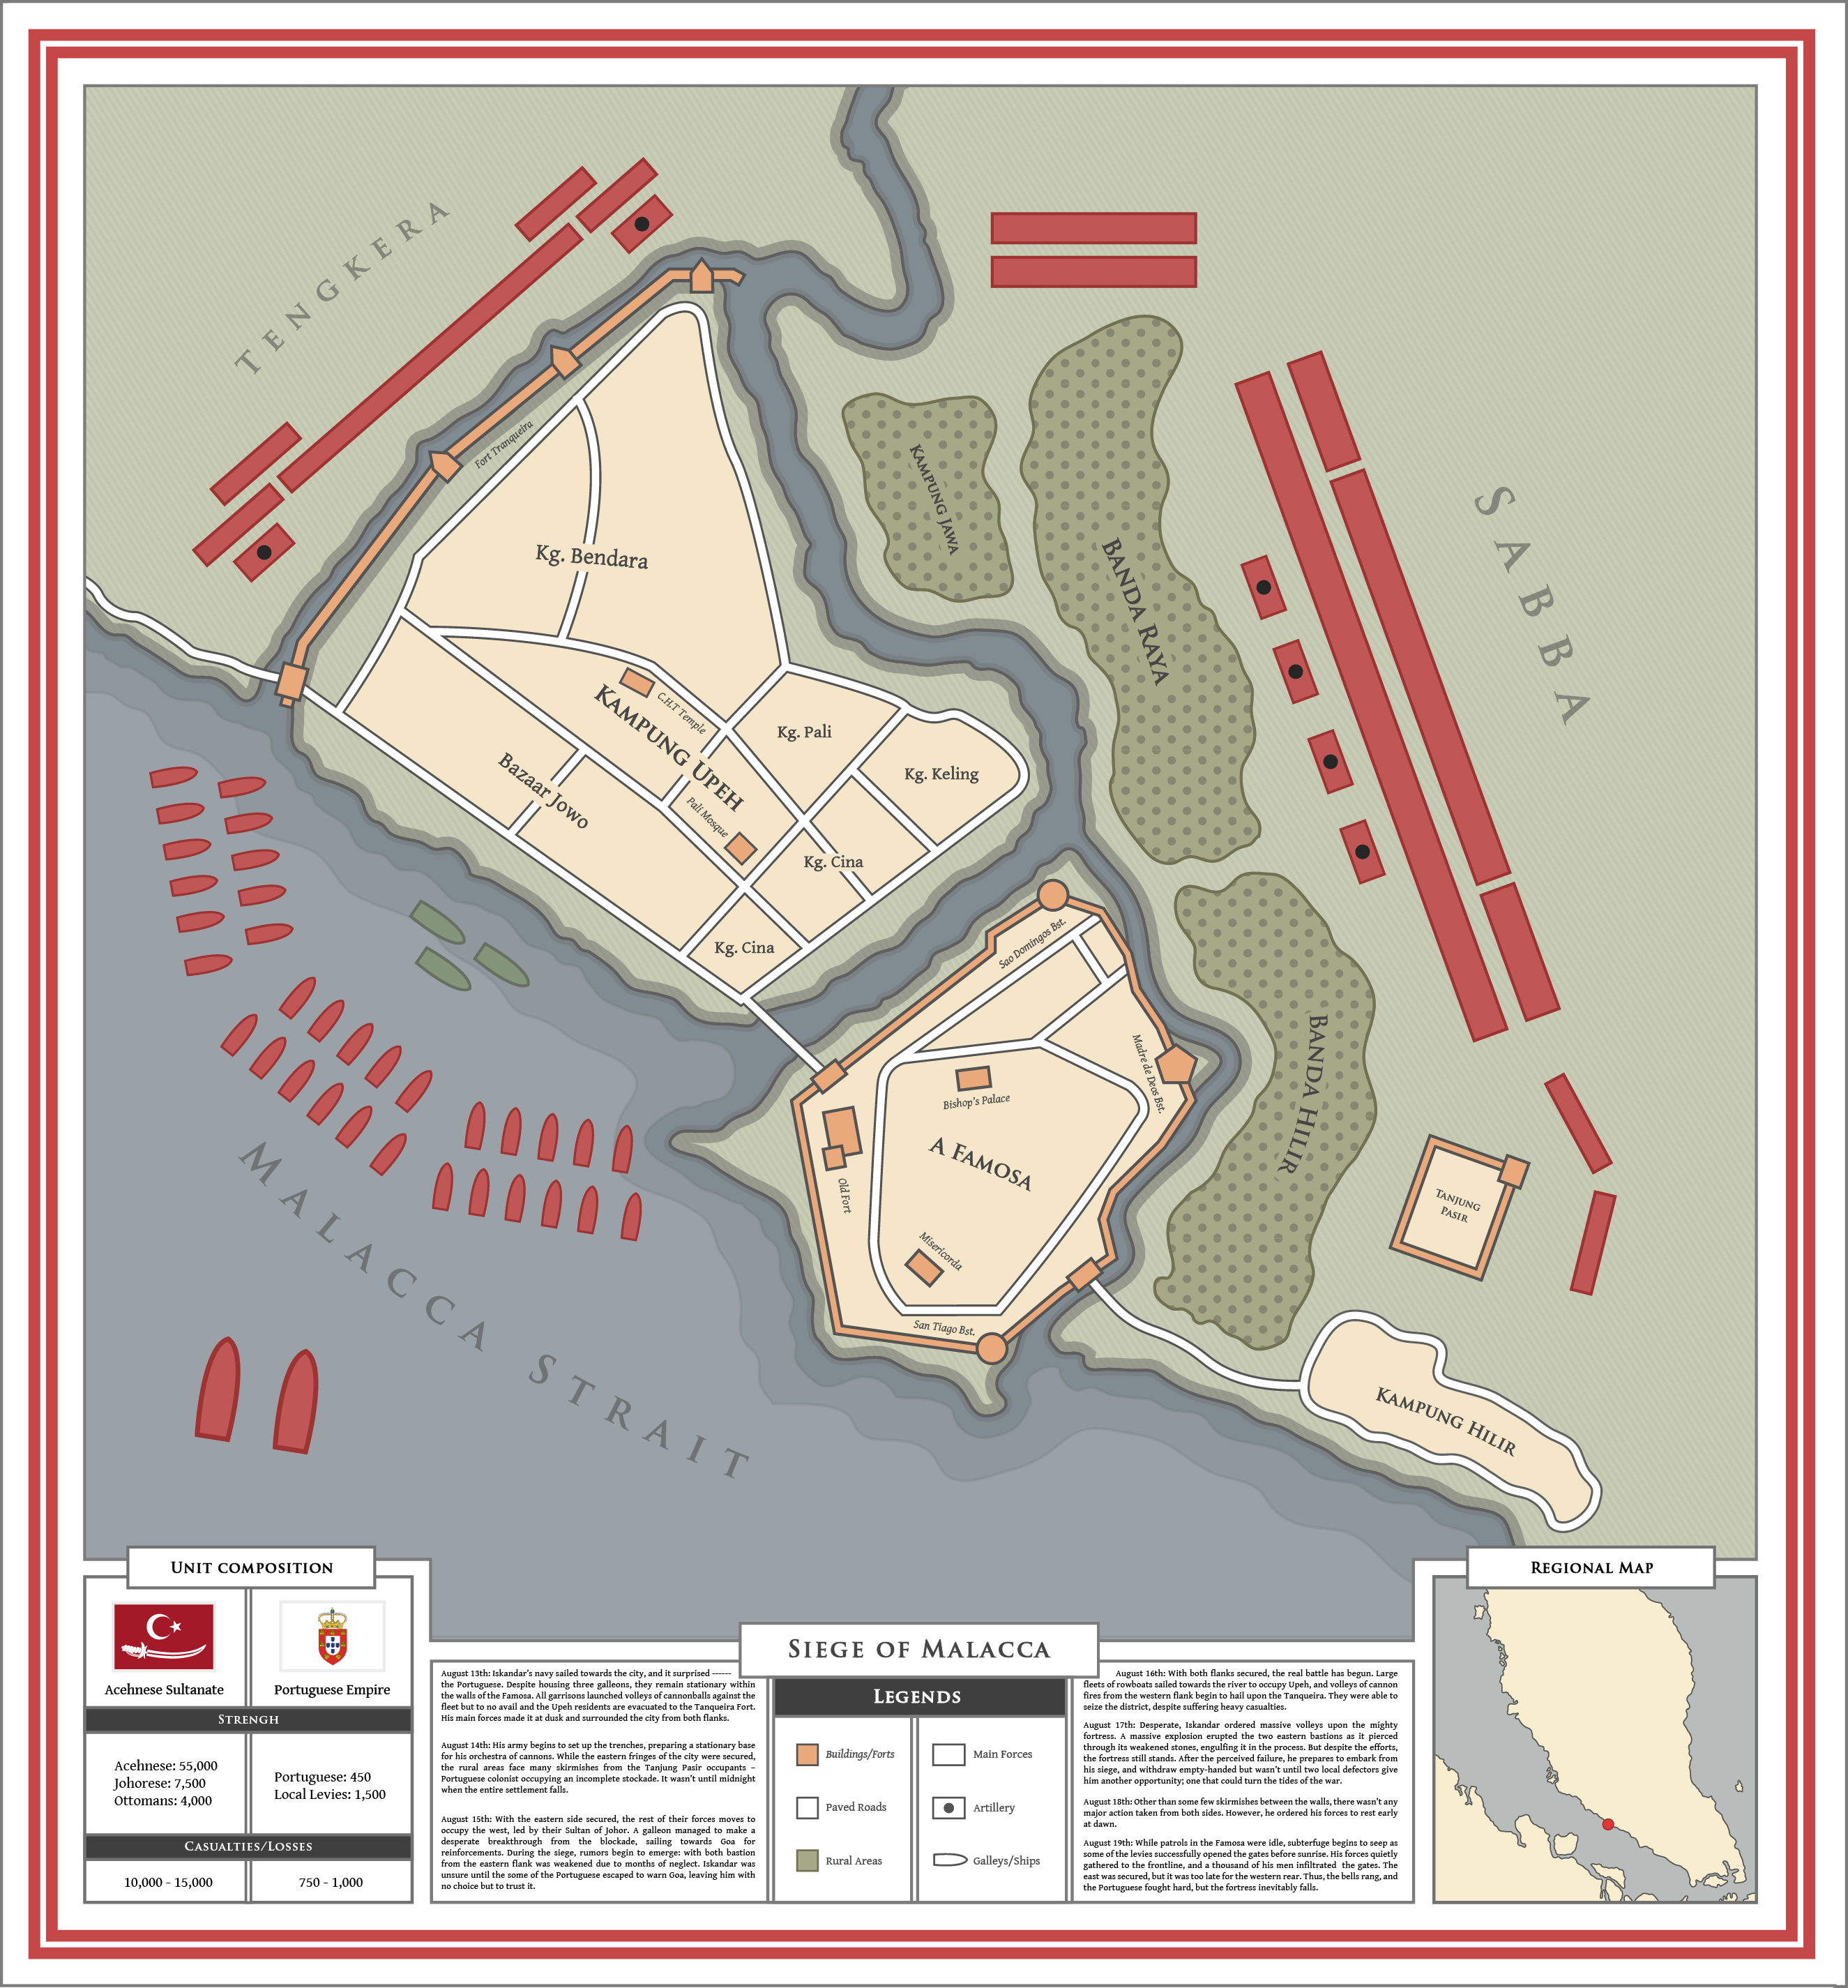 siege_of_malacca___1632_by_shahabbas1571-dcnr1t1.png